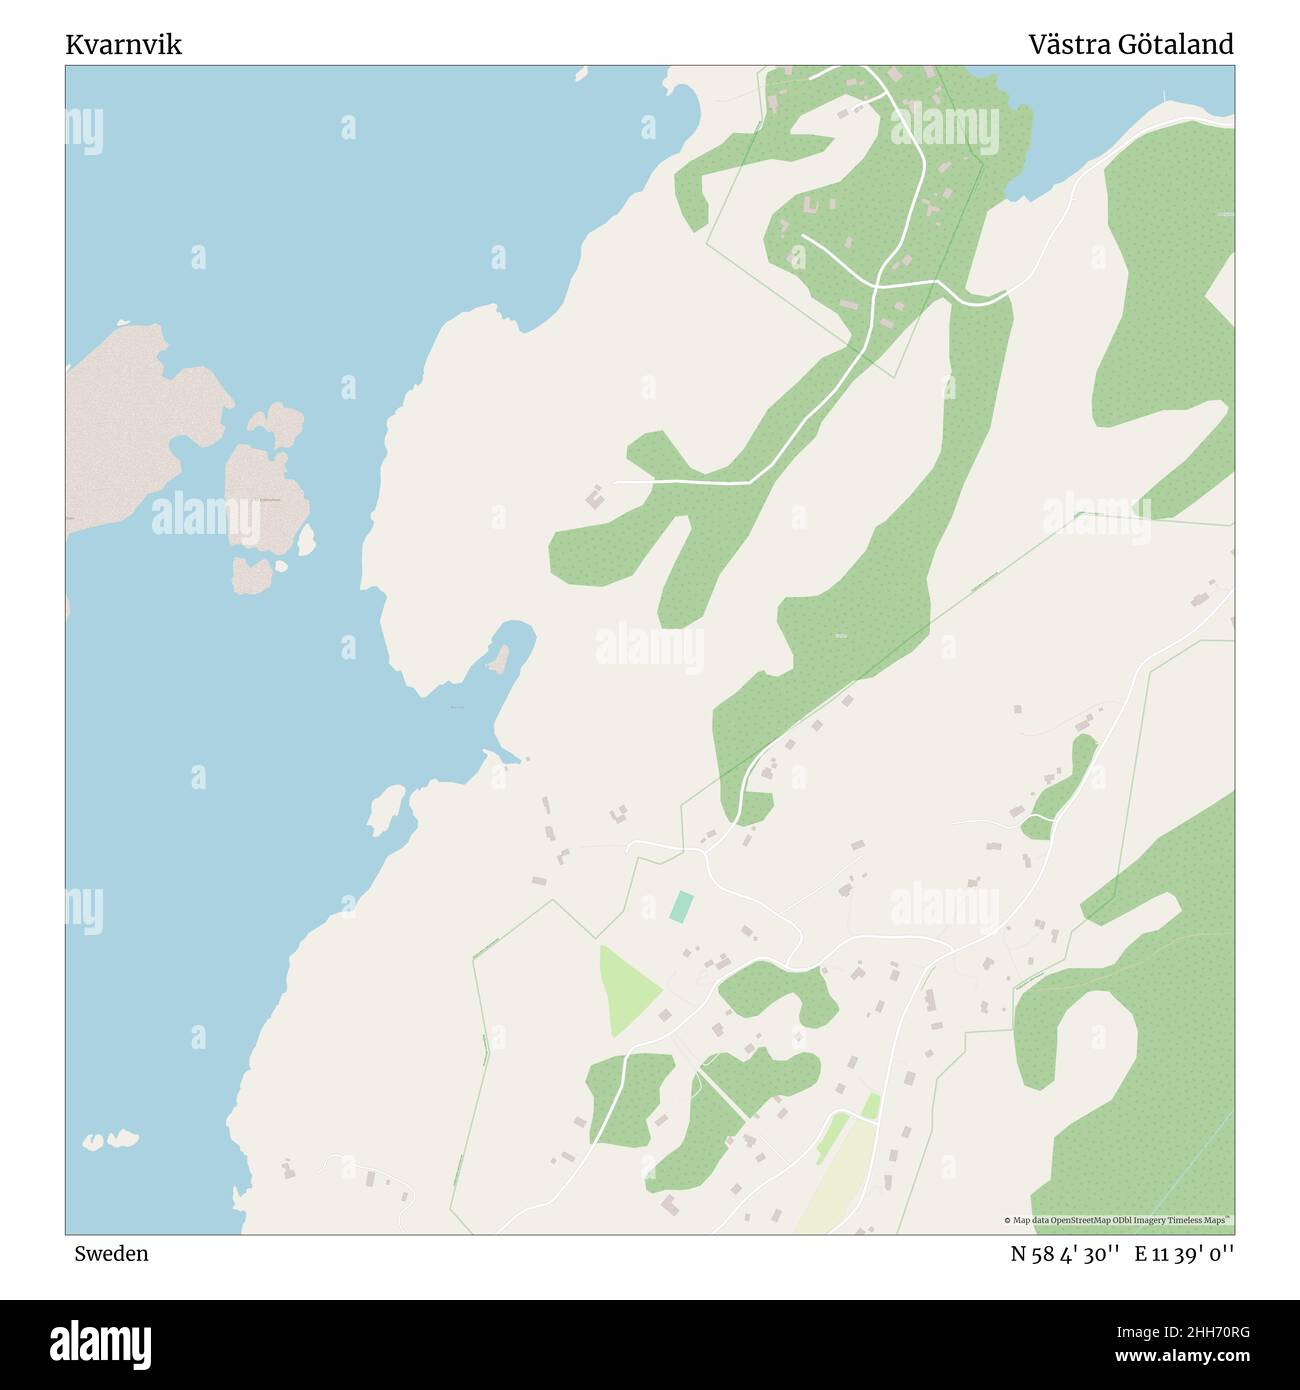 Kvarnvik, Sweden, Västra Götaland, N 58 4' 30'', E 11 39' 0'', map, Timeless Map published in 2021. Travelers, explorers and adventurers like Florence Nightingale, David Livingstone, Ernest Shackleton, Lewis and Clark and Sherlock Holmes relied on maps to plan travels to the world's most remote corners, Timeless Maps is mapping most locations on the globe, showing the achievement of great dreams. Stock Photo